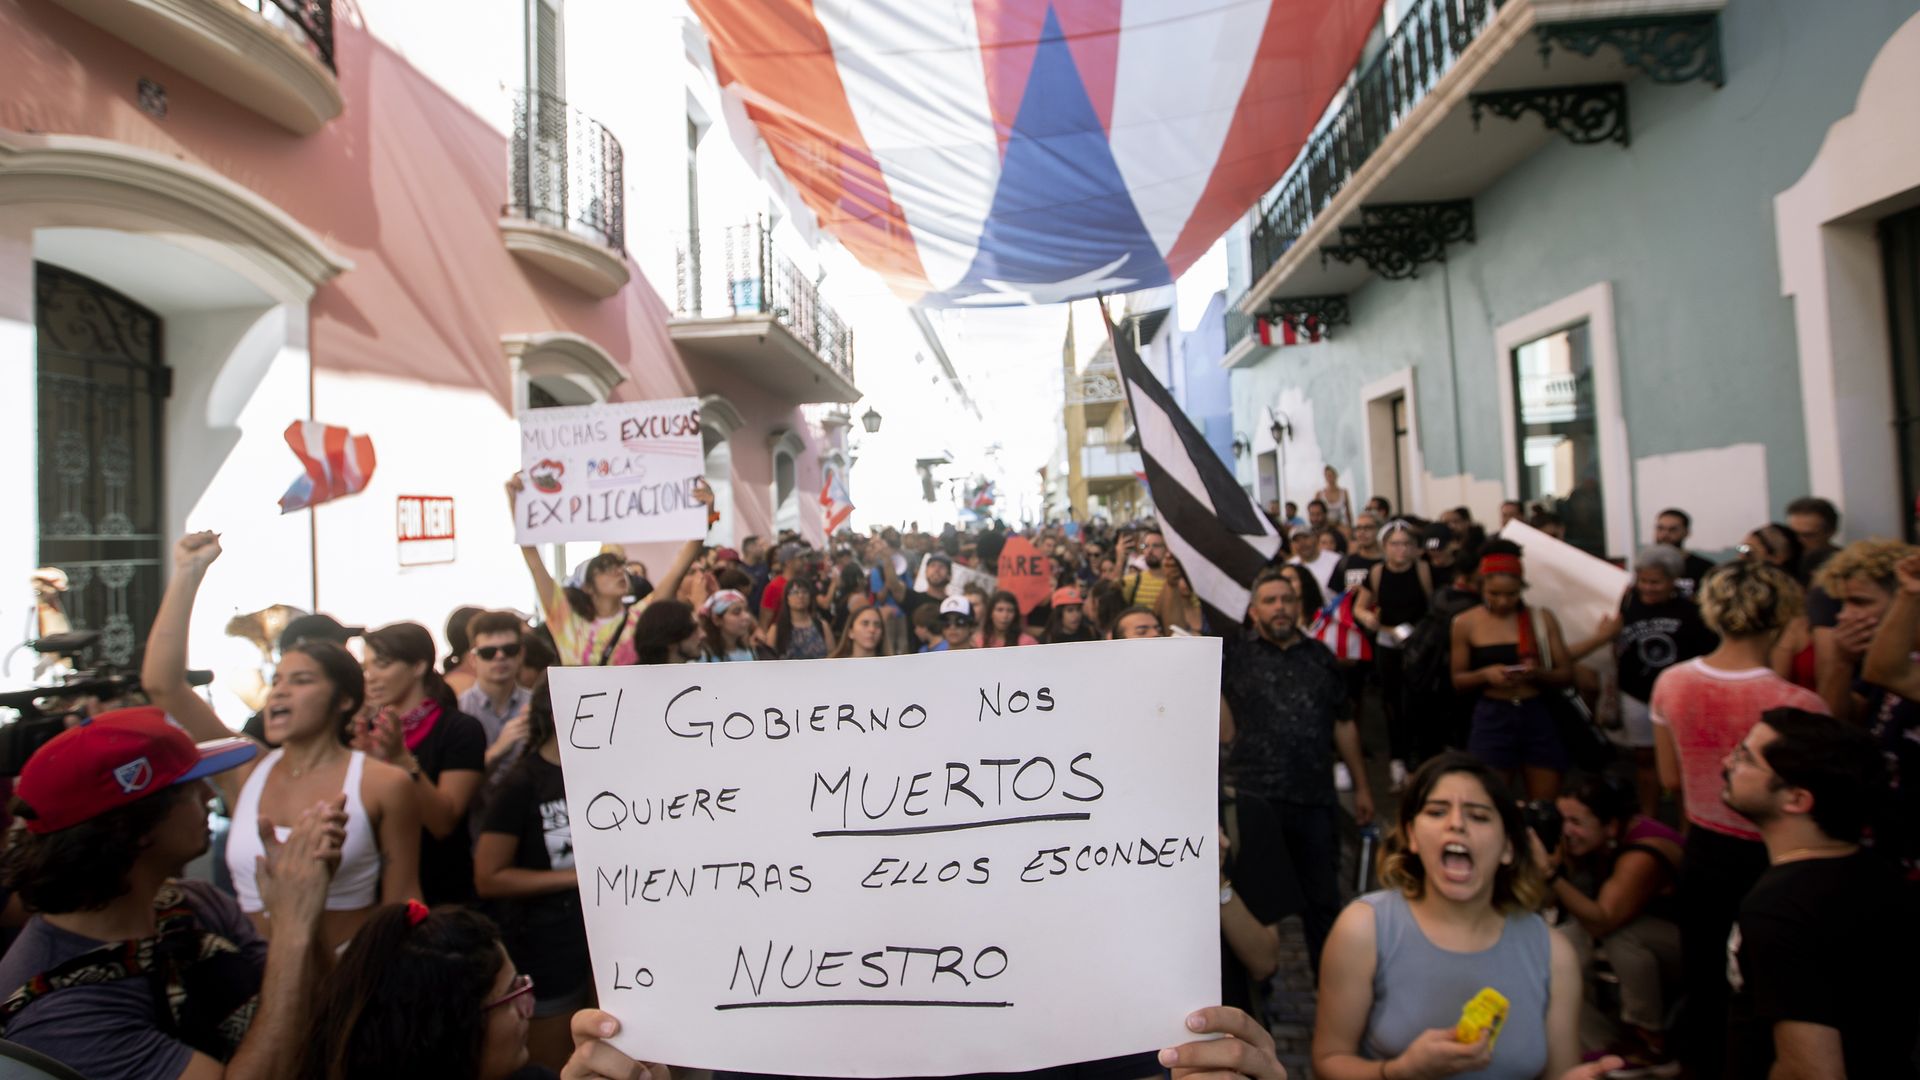 Protesters demand the resignation of Governor Wanda Vázquez Garced  in front of the Governors mansion on January 20, 2020 in San Juan